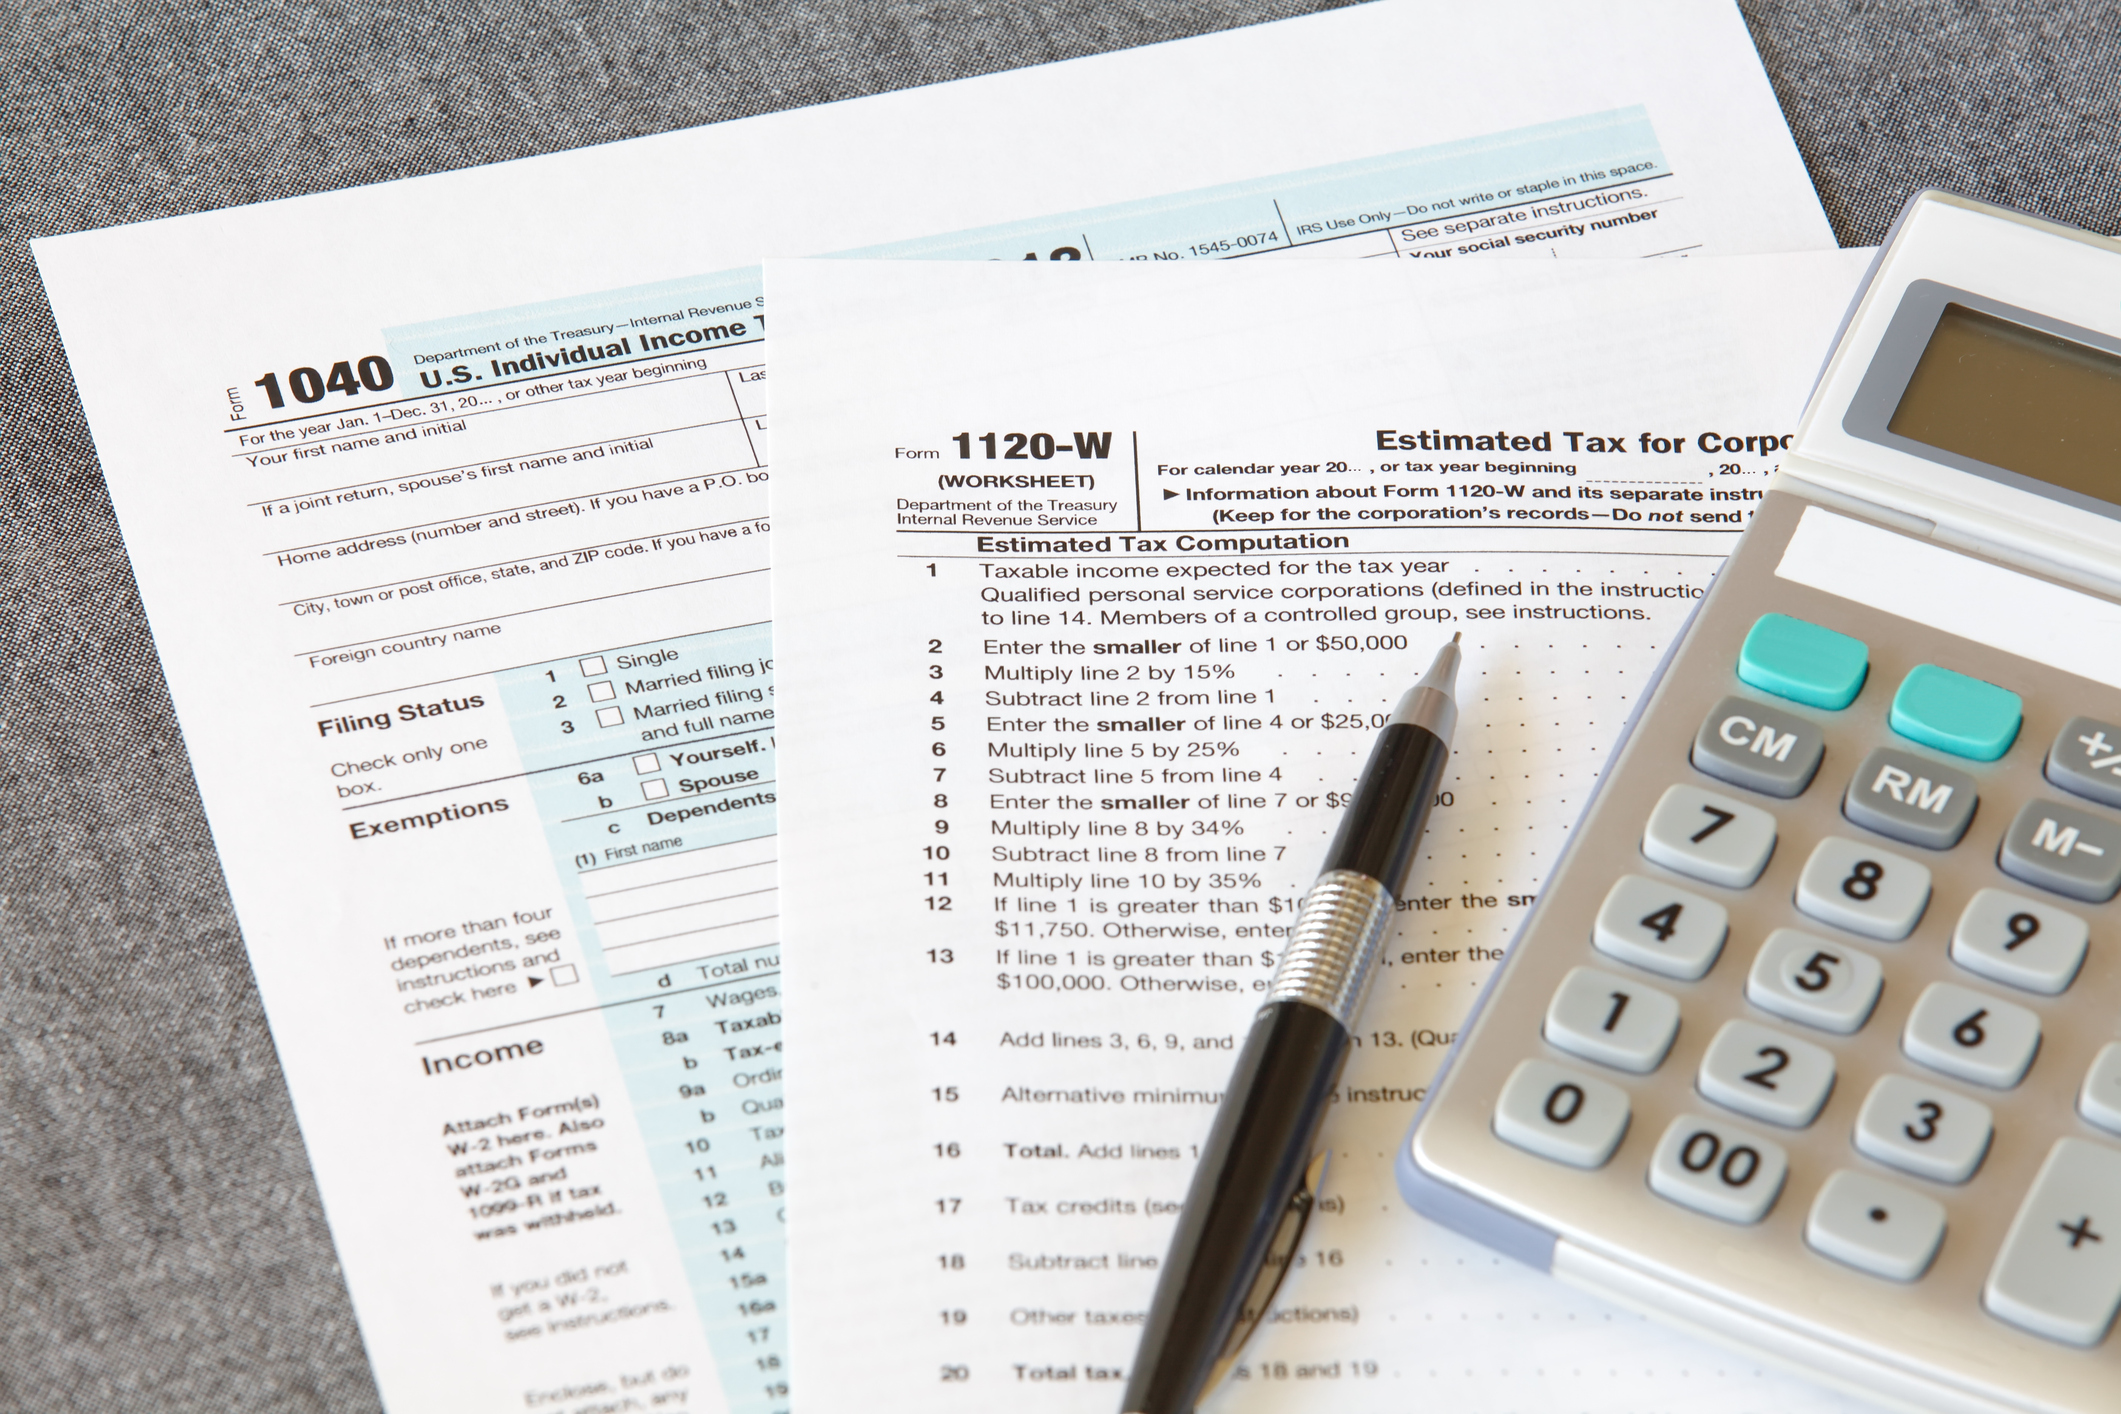 Most Prevalent Deduction is for Taxes Paid, IRS Data Show